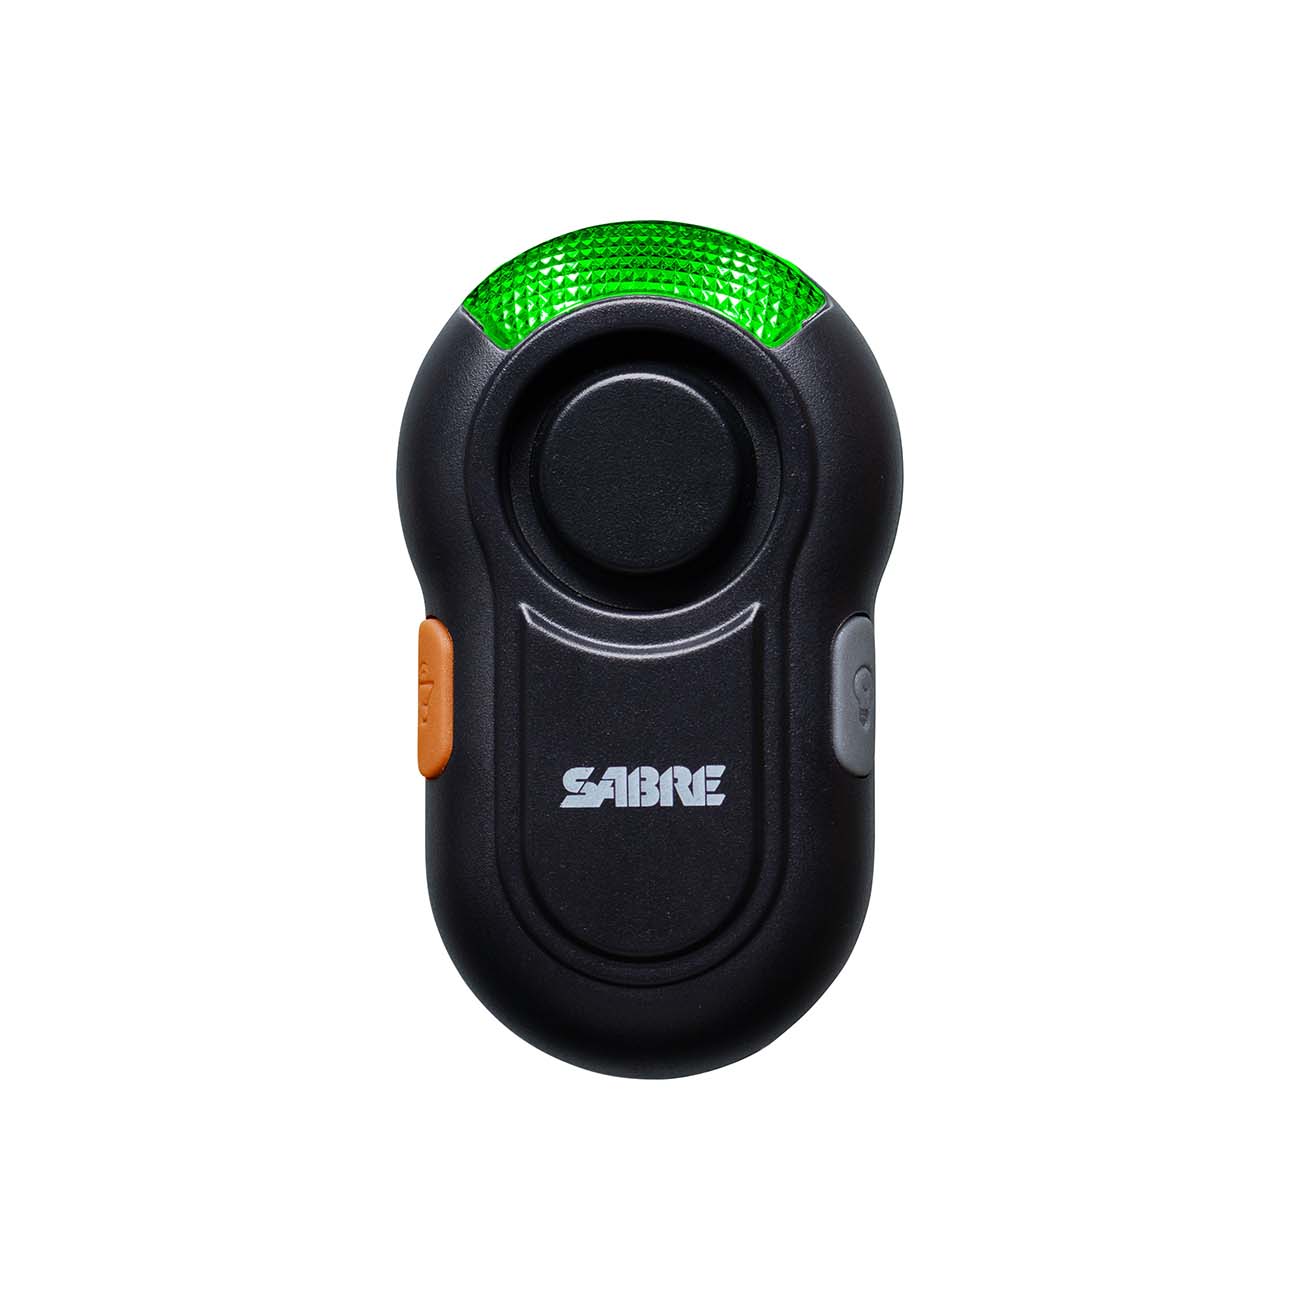 Sabre Personal Alarm with LED - Black